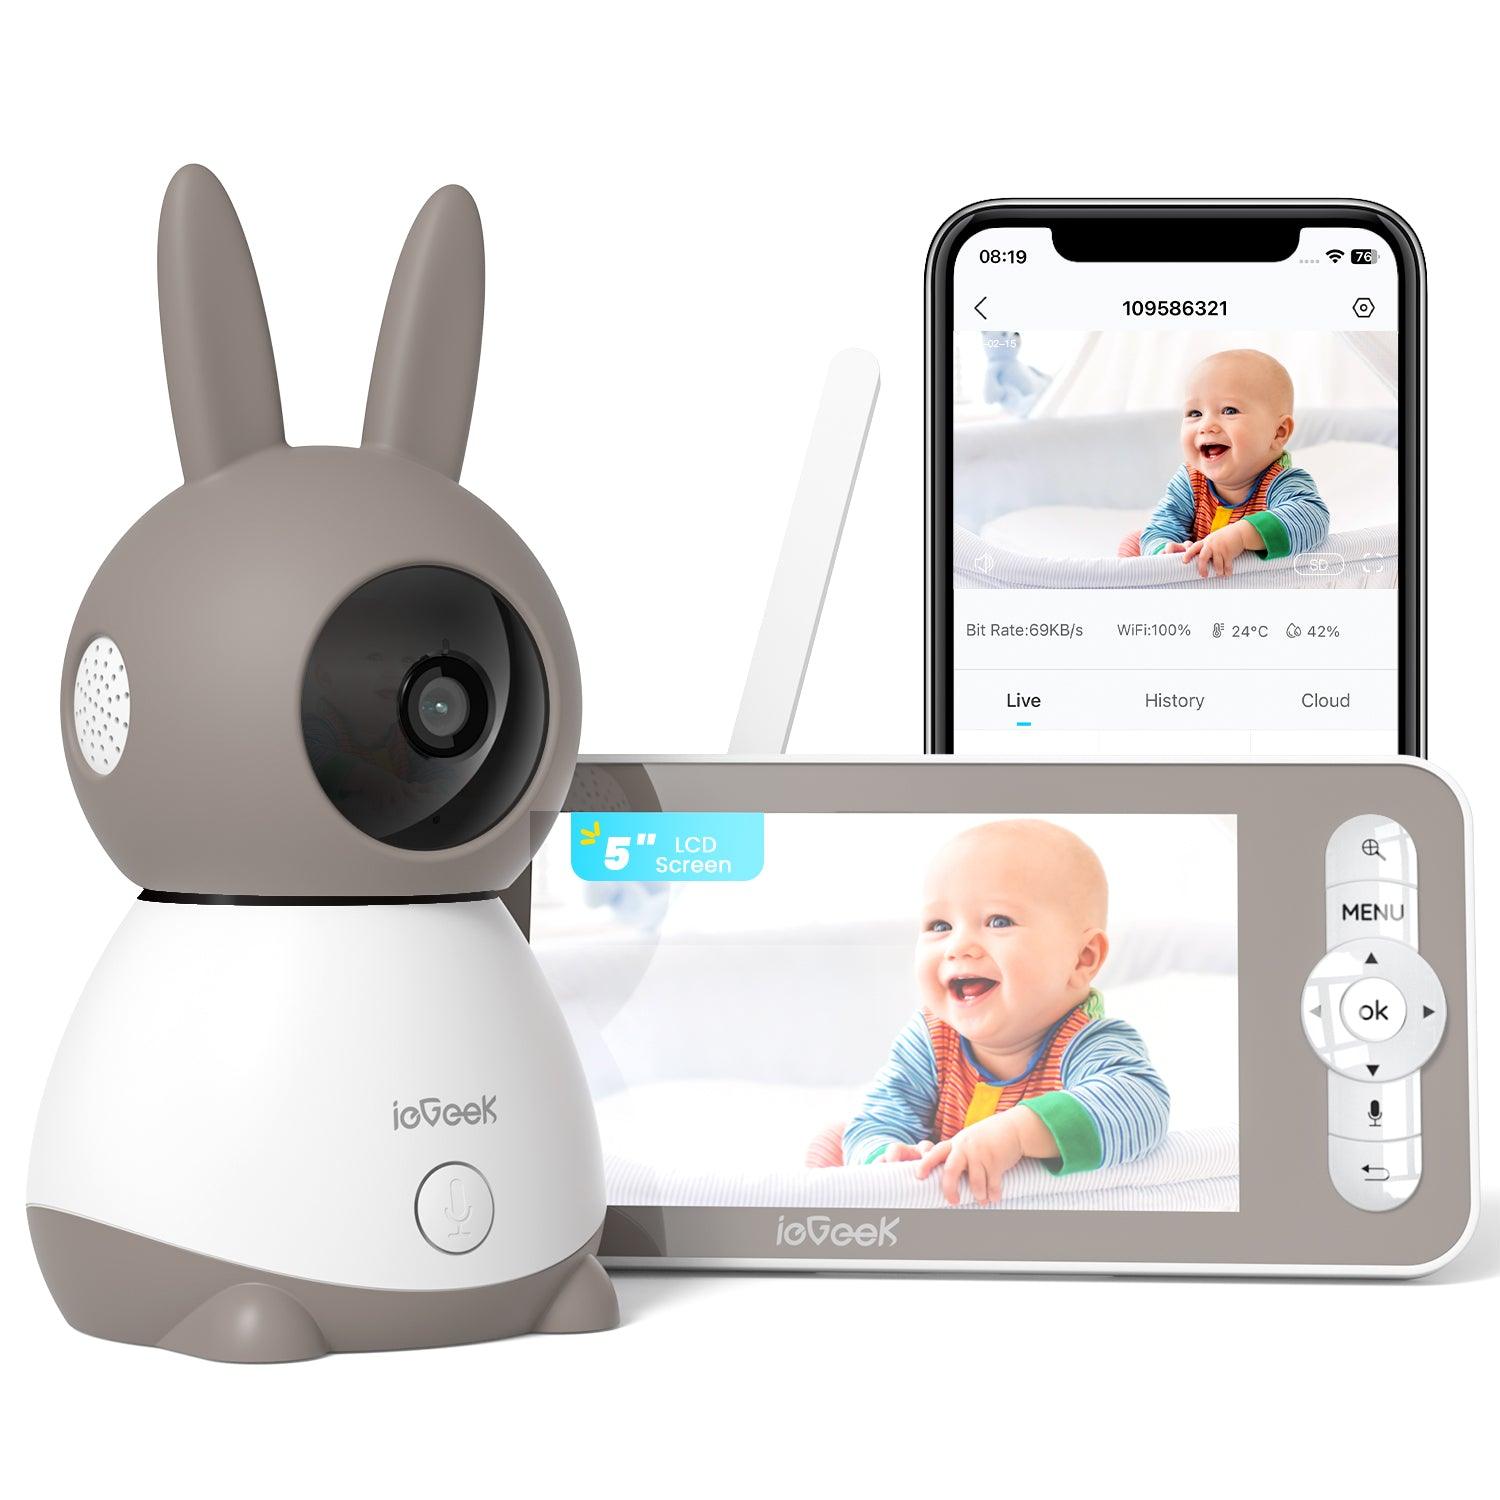 ieGeek Baby 1T - 2K WiFi 5-inch Screen Baby Monitor with Motion